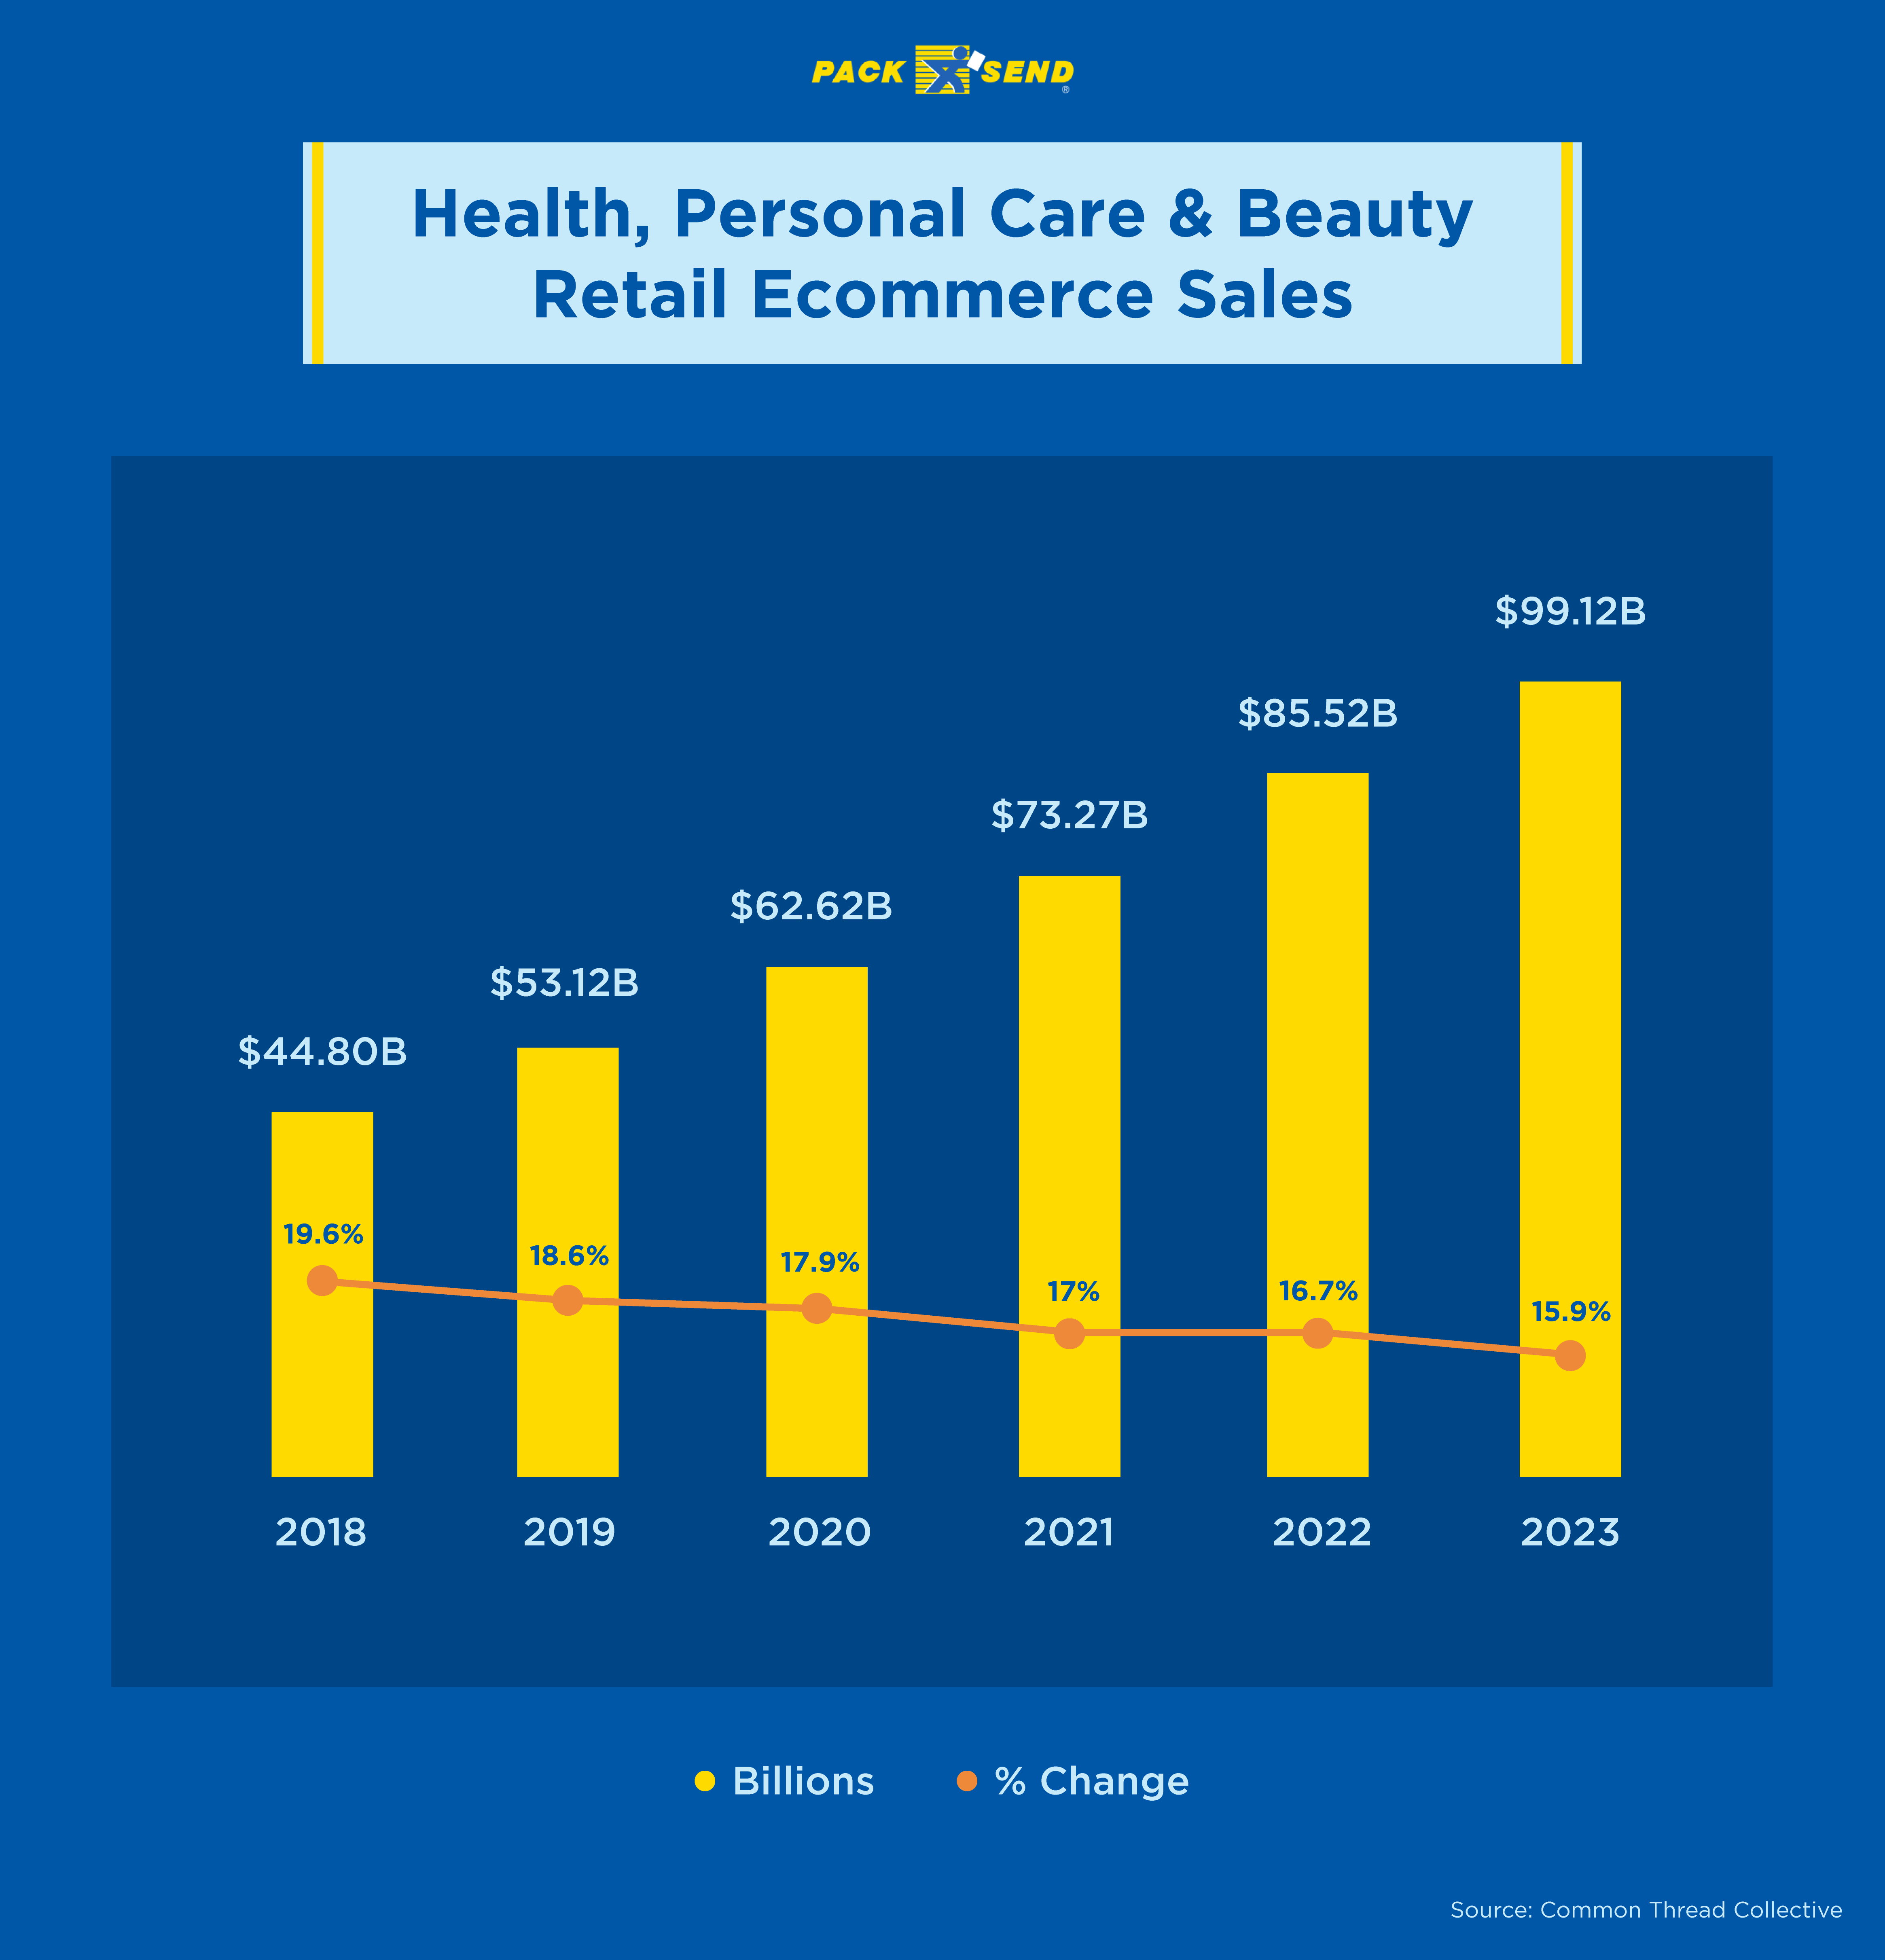 Retail ecommerce sales of health, personal care and beauty products